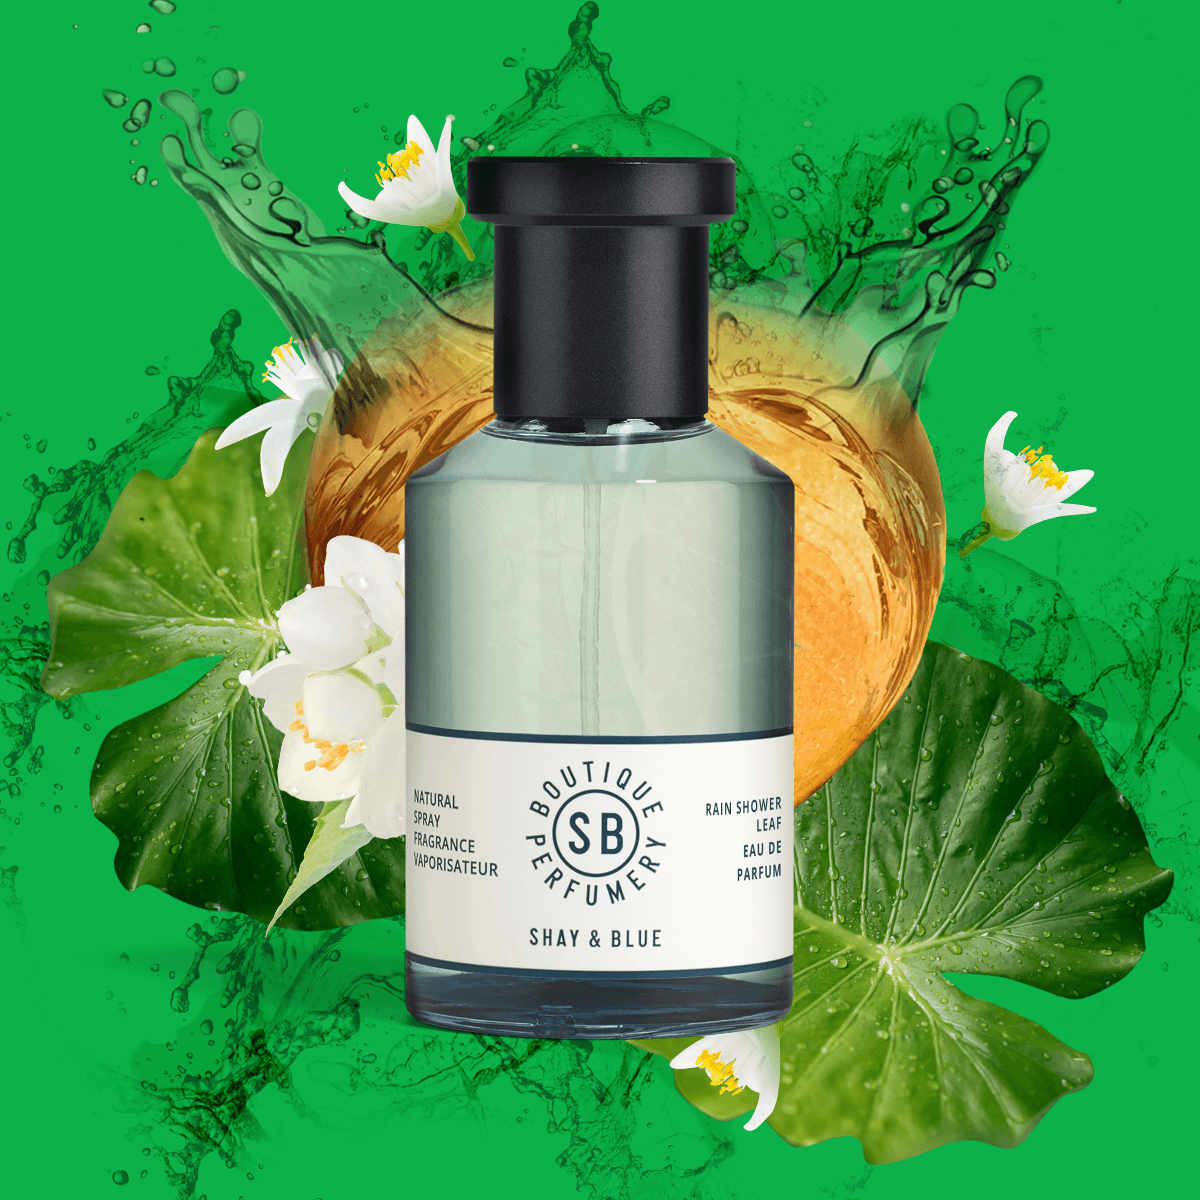 Rain Shower Leaf Limited Edition Fragrance 100ml | Wake up and smell the rain with this undoubtably unisex floral - dripping with bracing sprays of cool freshness. | Clean All Gender Fragrance | Shay & Blue